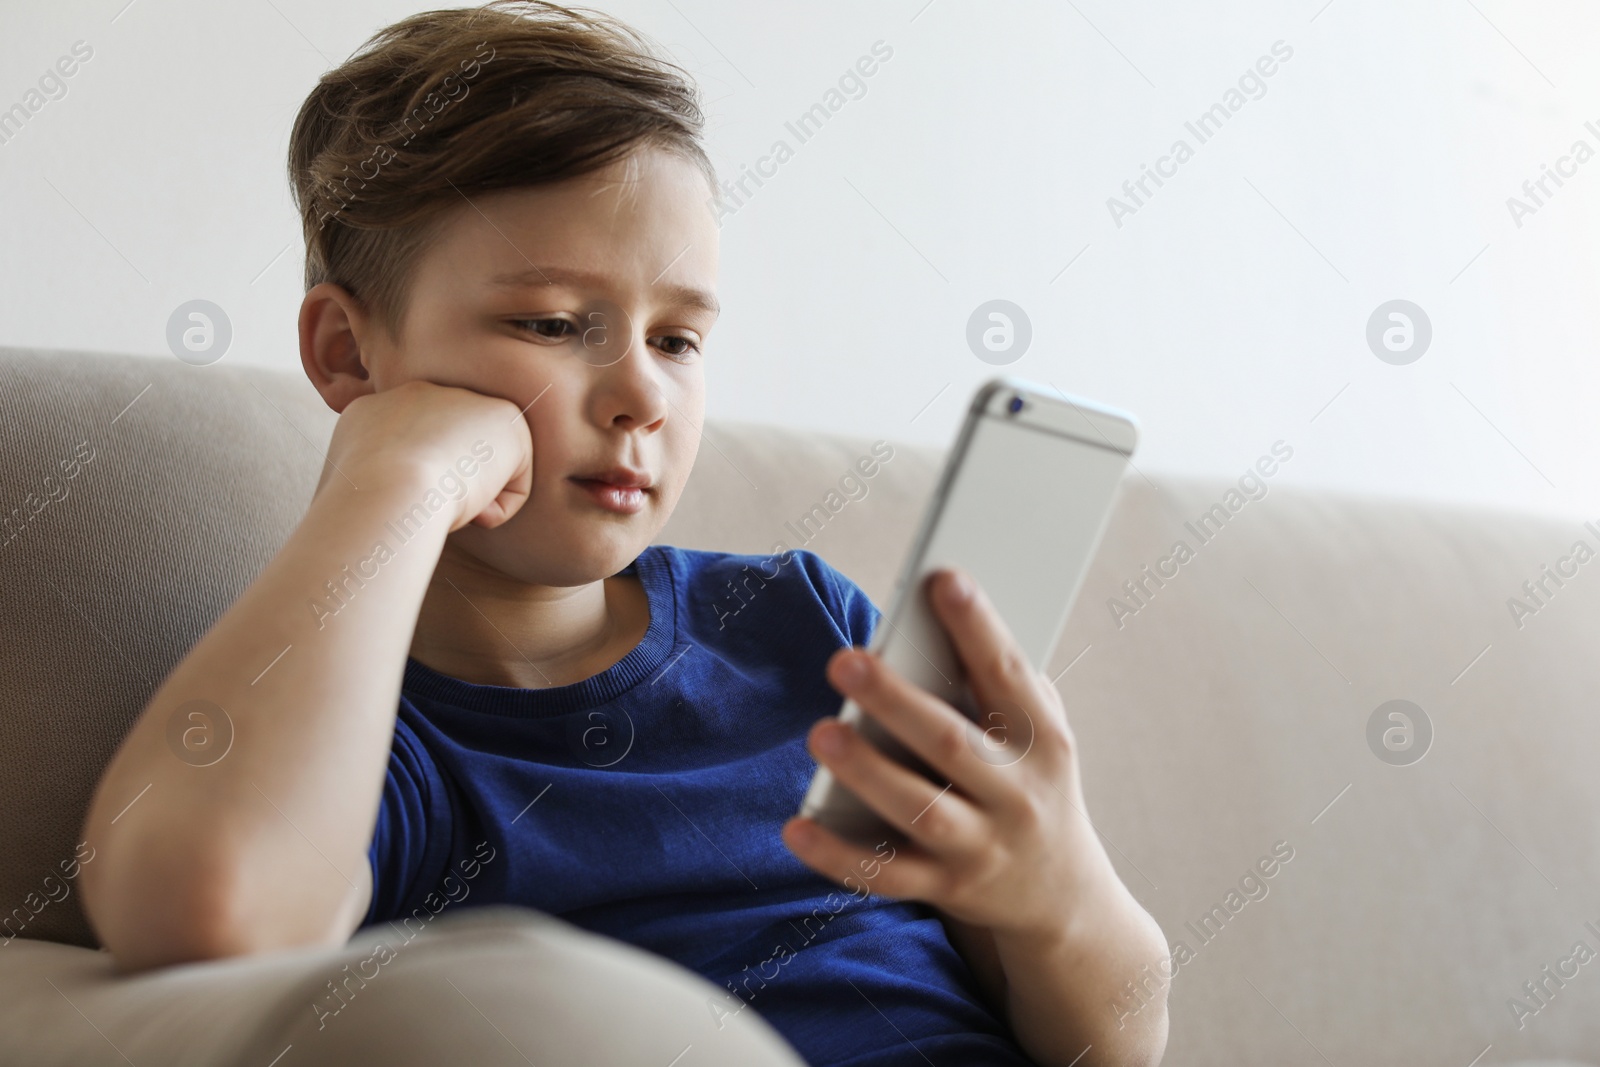 Photo of Little child with smartphone on sofa in room. Danger of internet